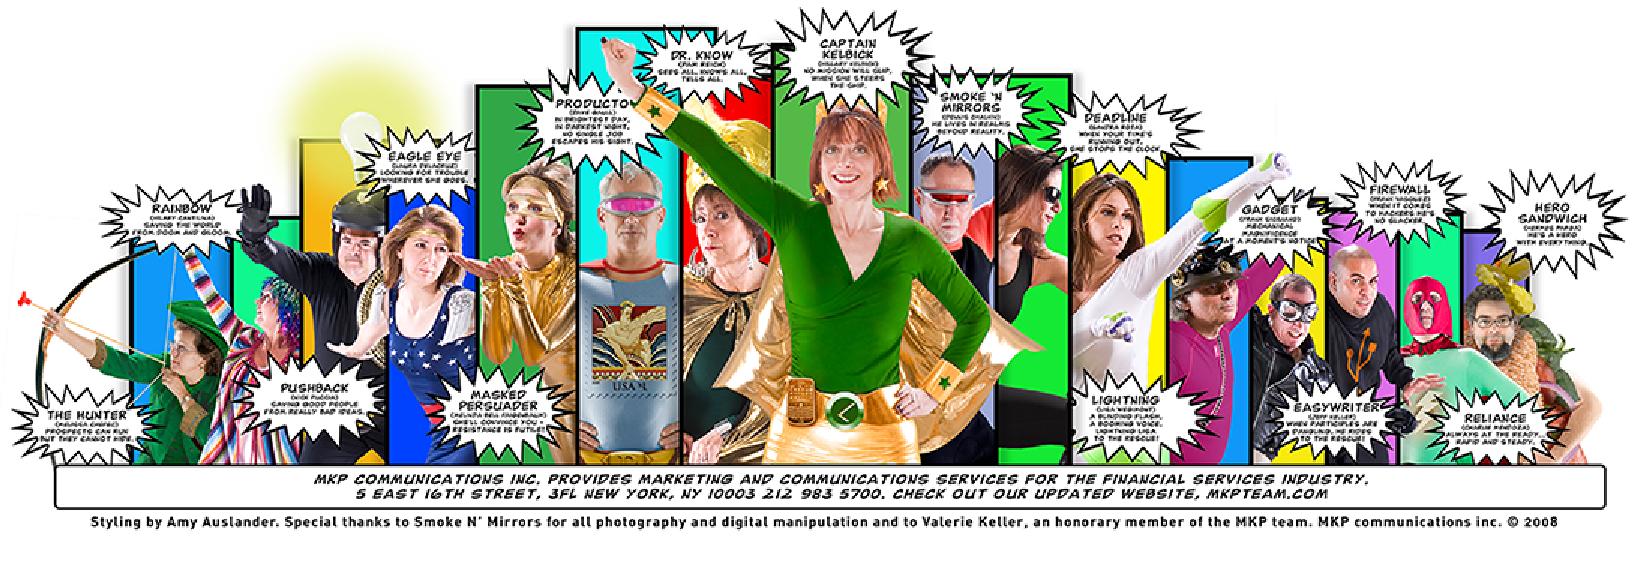 2008 Holiday Card page 3